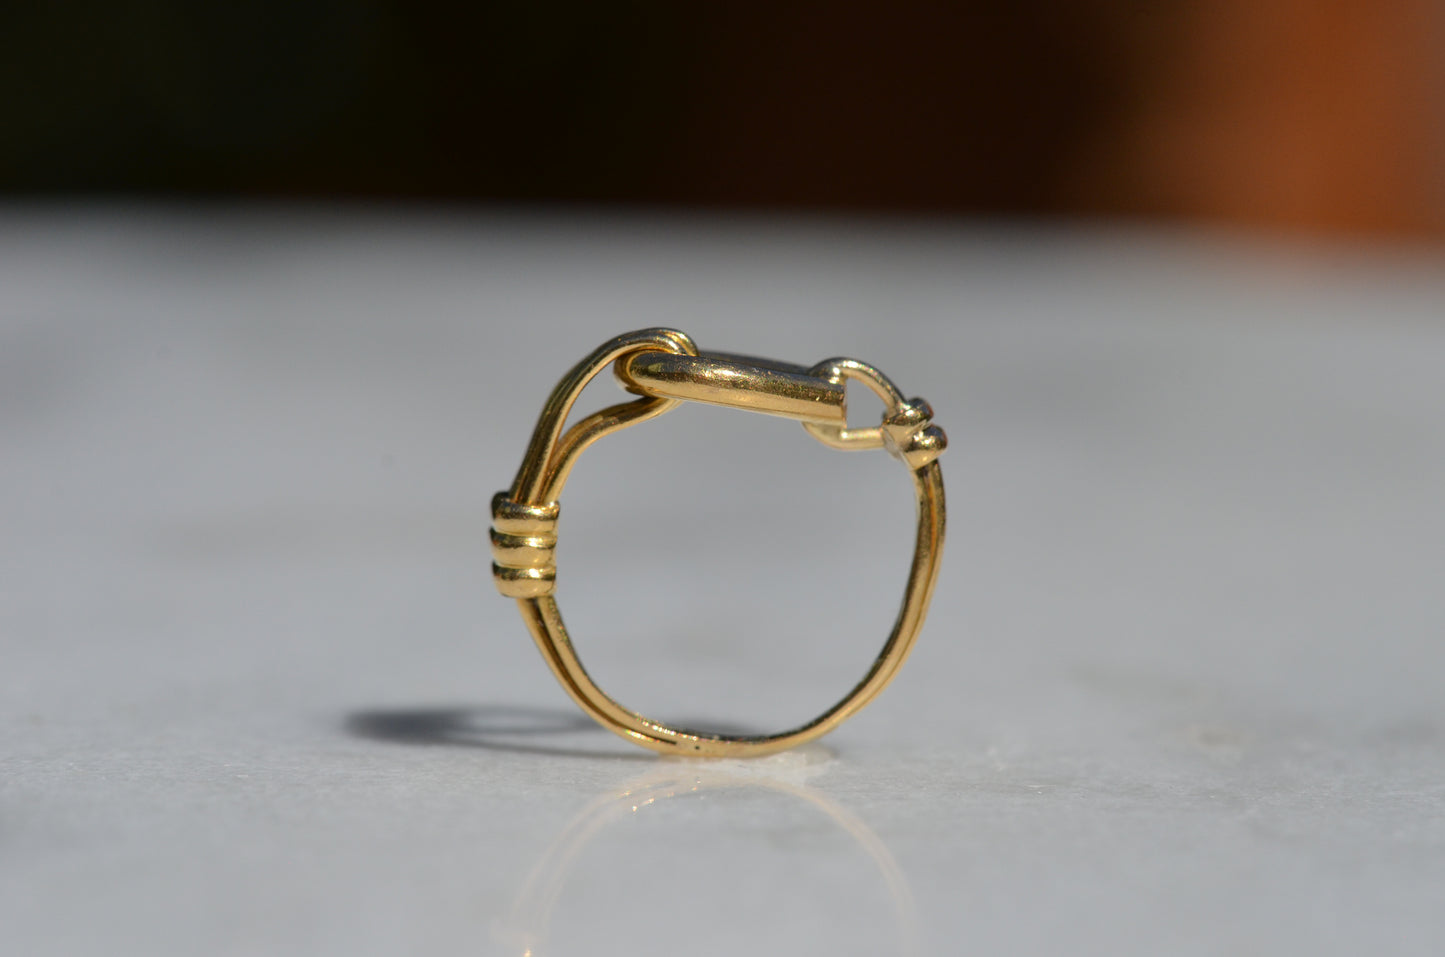 The ring is positioned upright and looking through the finger hole, further showcasing the asymmetric design and the flat top of the ring.